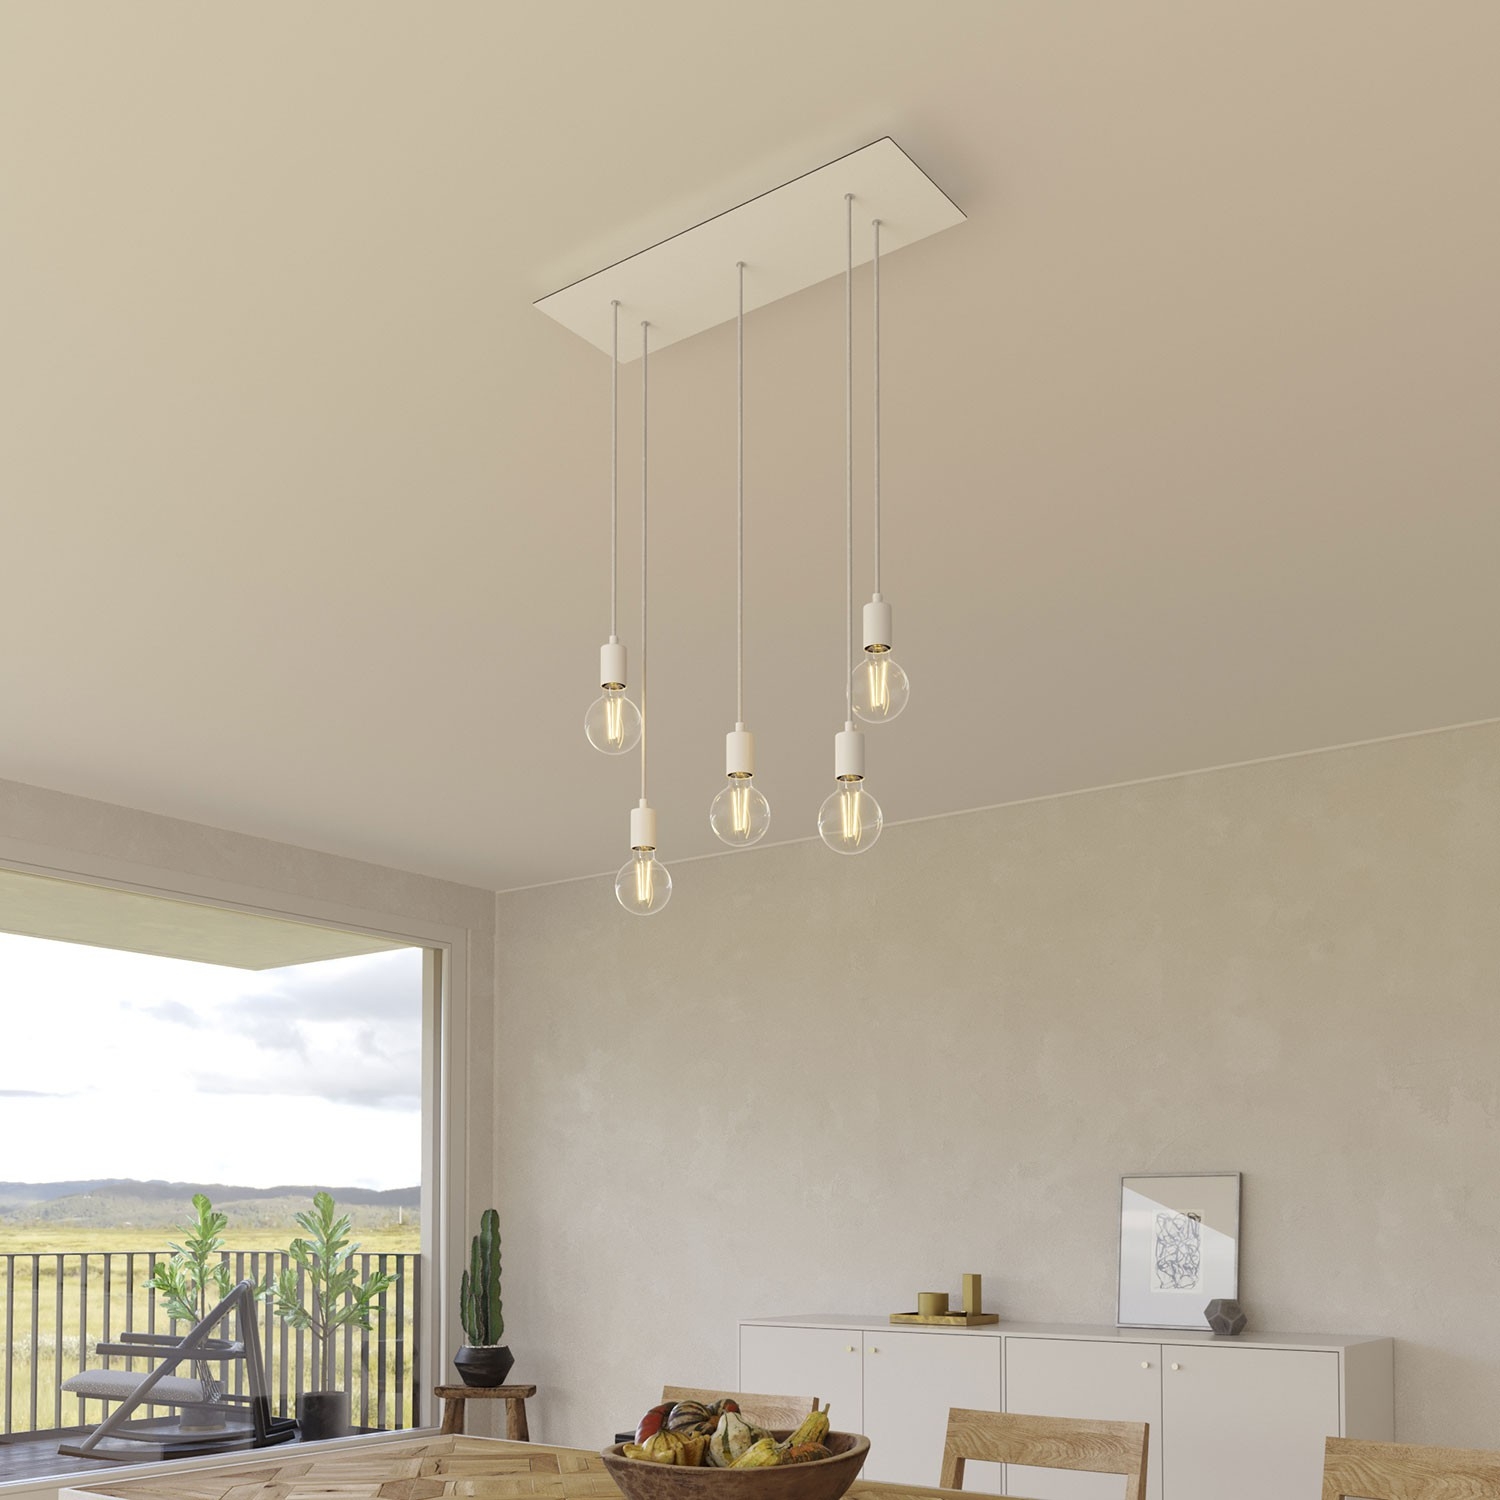 5 hole - EXTRA LARGE Rectangular Ceiling Canopy Kit - Rose One System, 675 x 225 mm Cover